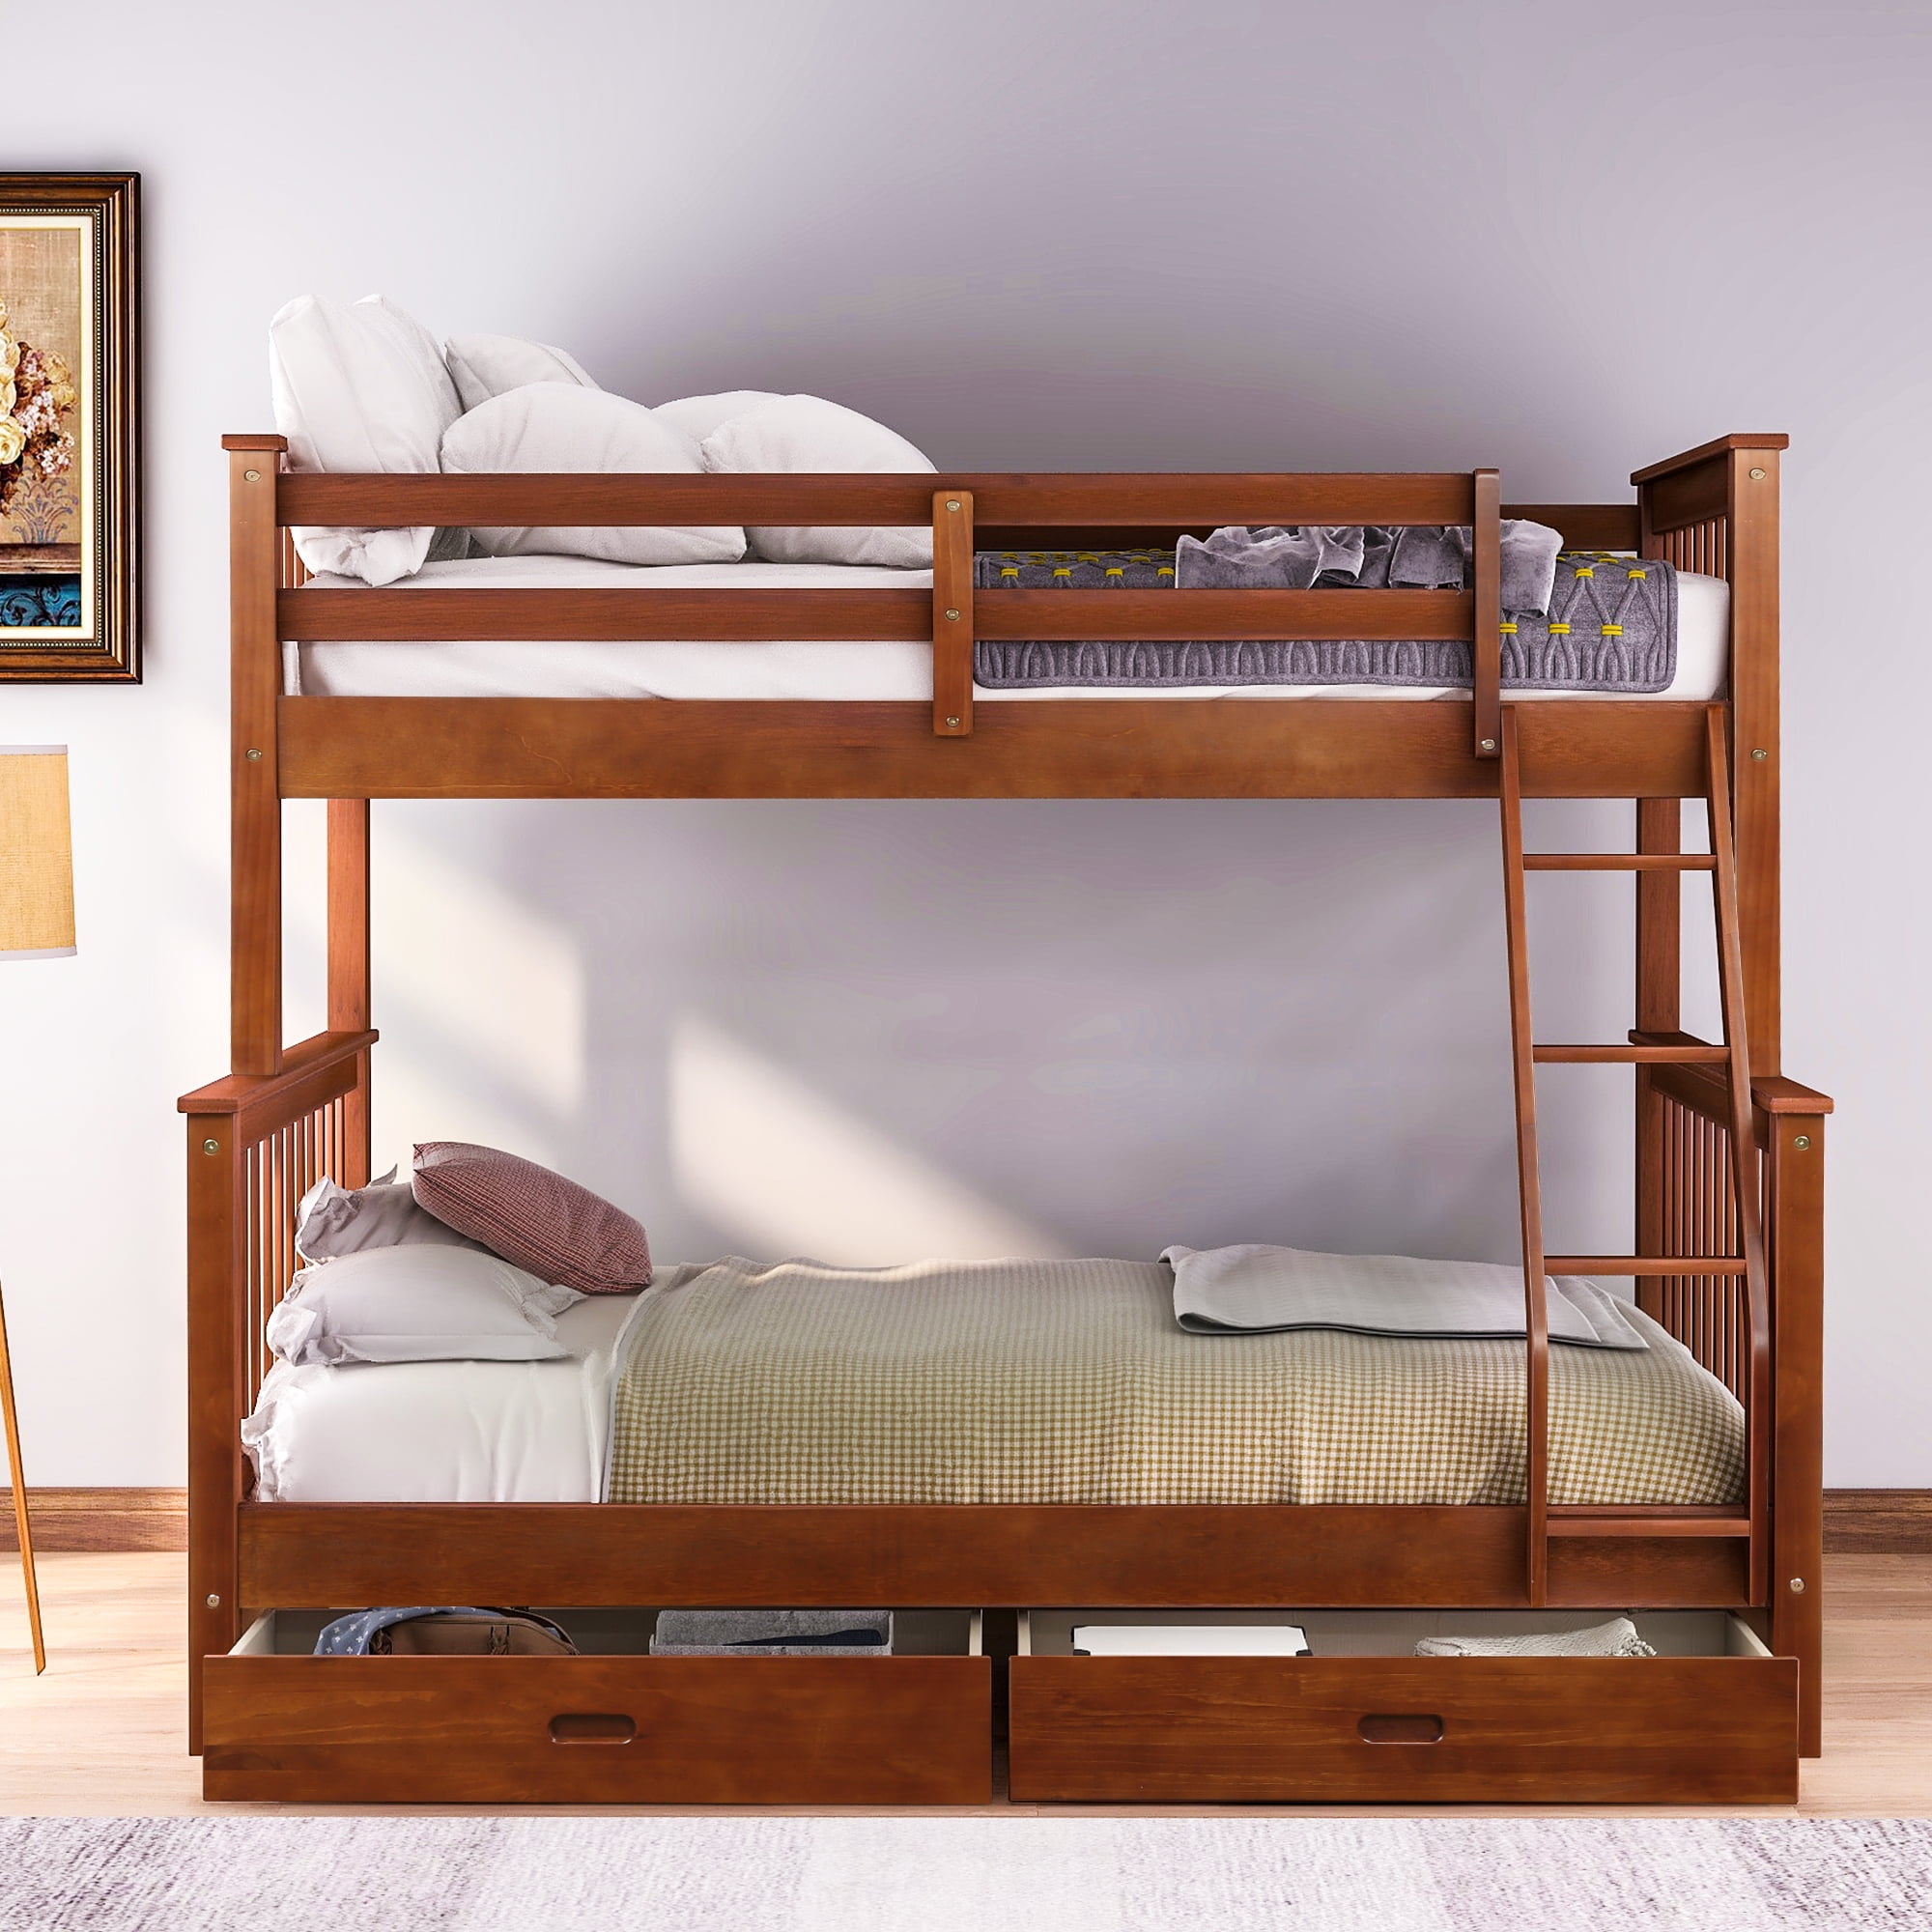 Twin Over Full Bunk Bed Frame Pretty, Wood Bunk Beds Twin Over Full